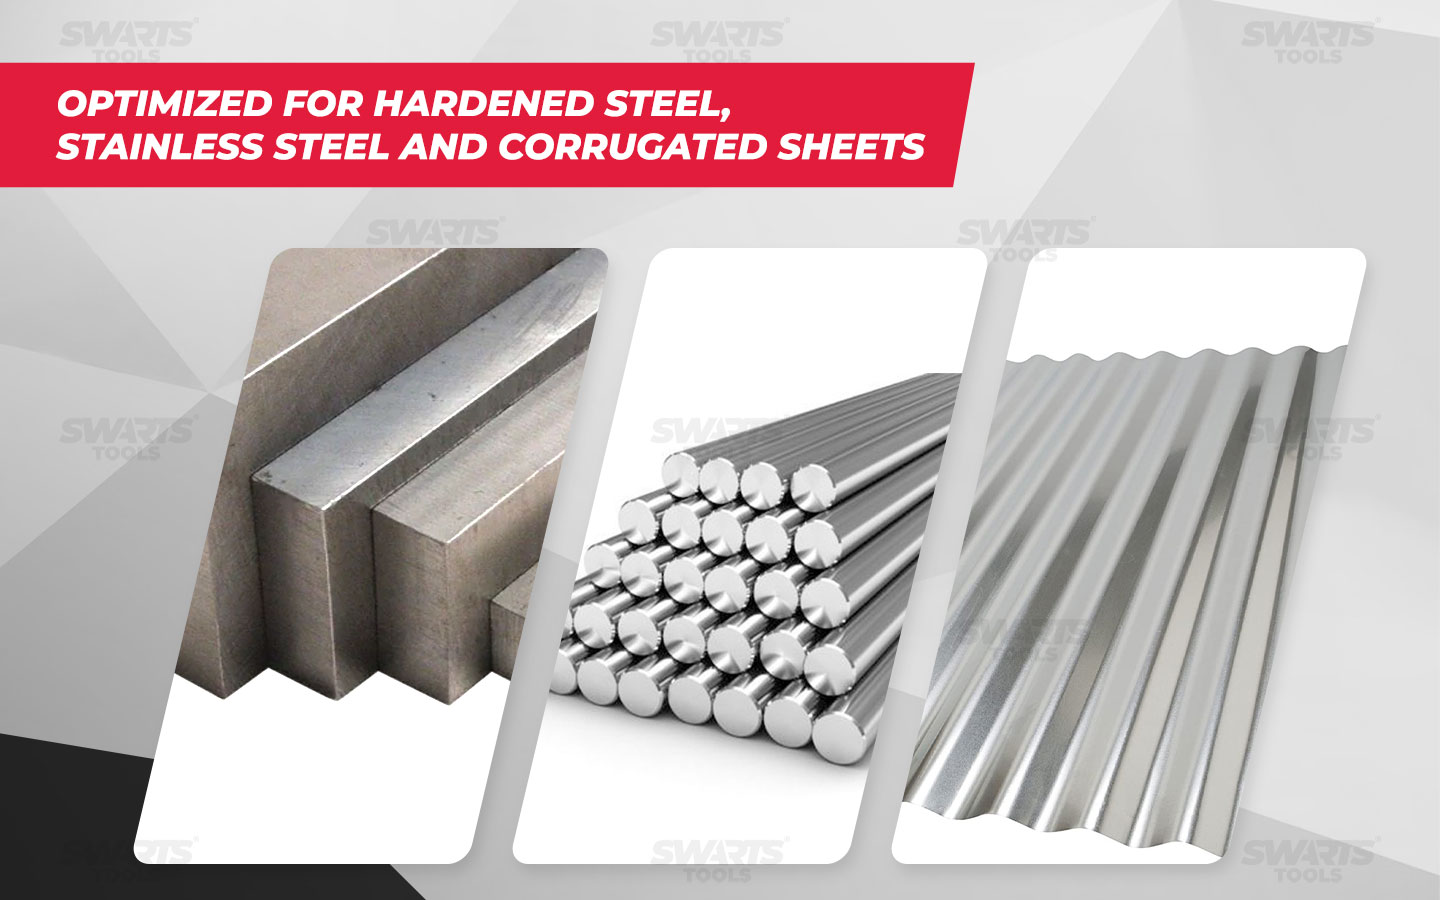 optimized for hardened steel, stainless steel and corrugated sheets